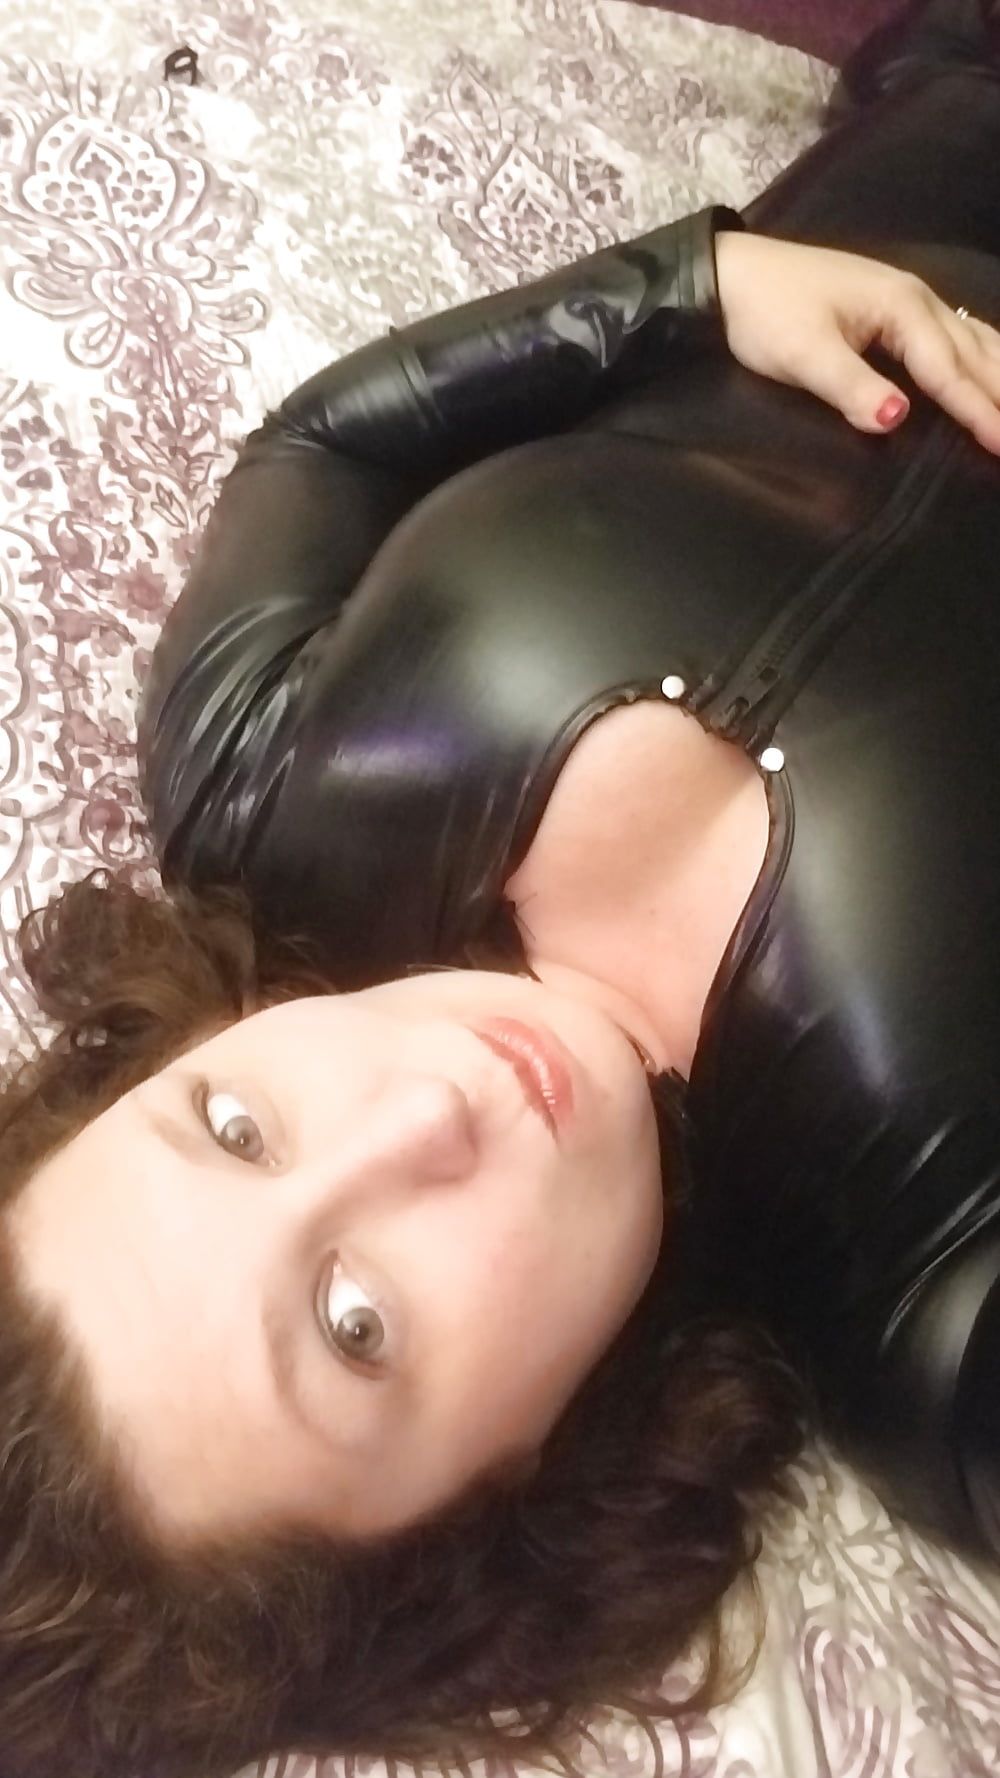 New cat suit birthday surprise for hubby - milf housewife  #42